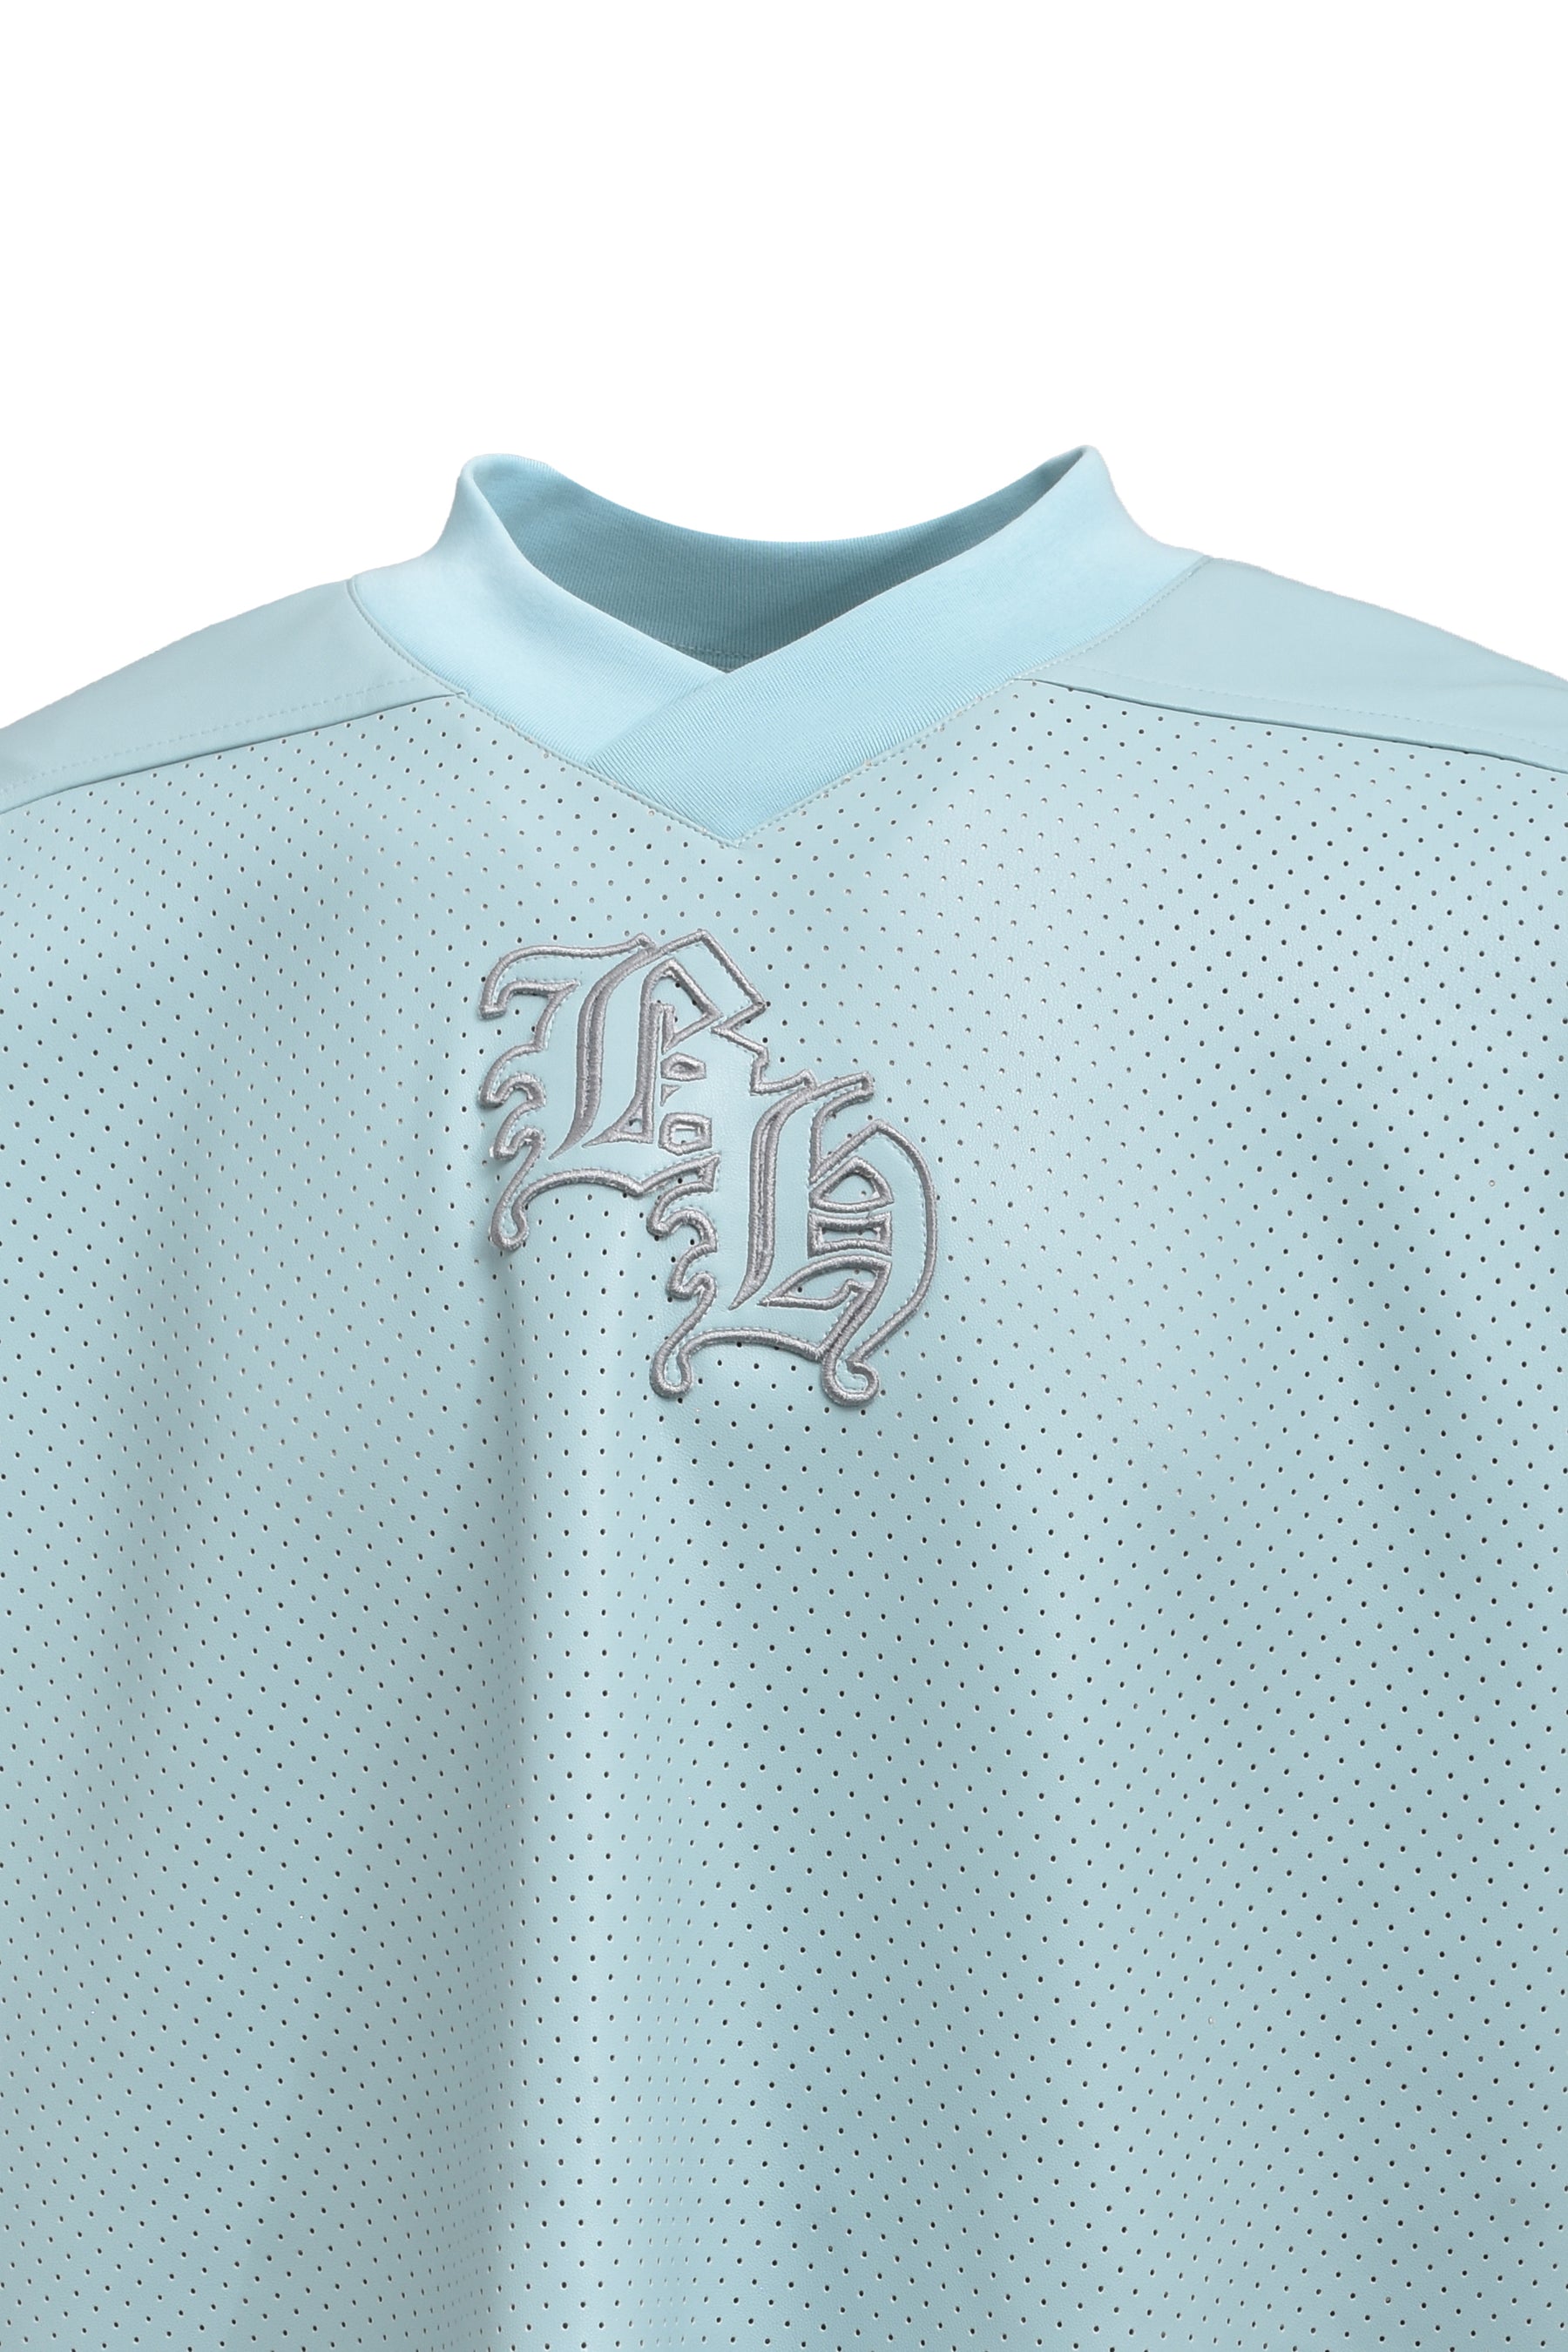 FAUX LEATHER GAME SHIRT / ICE